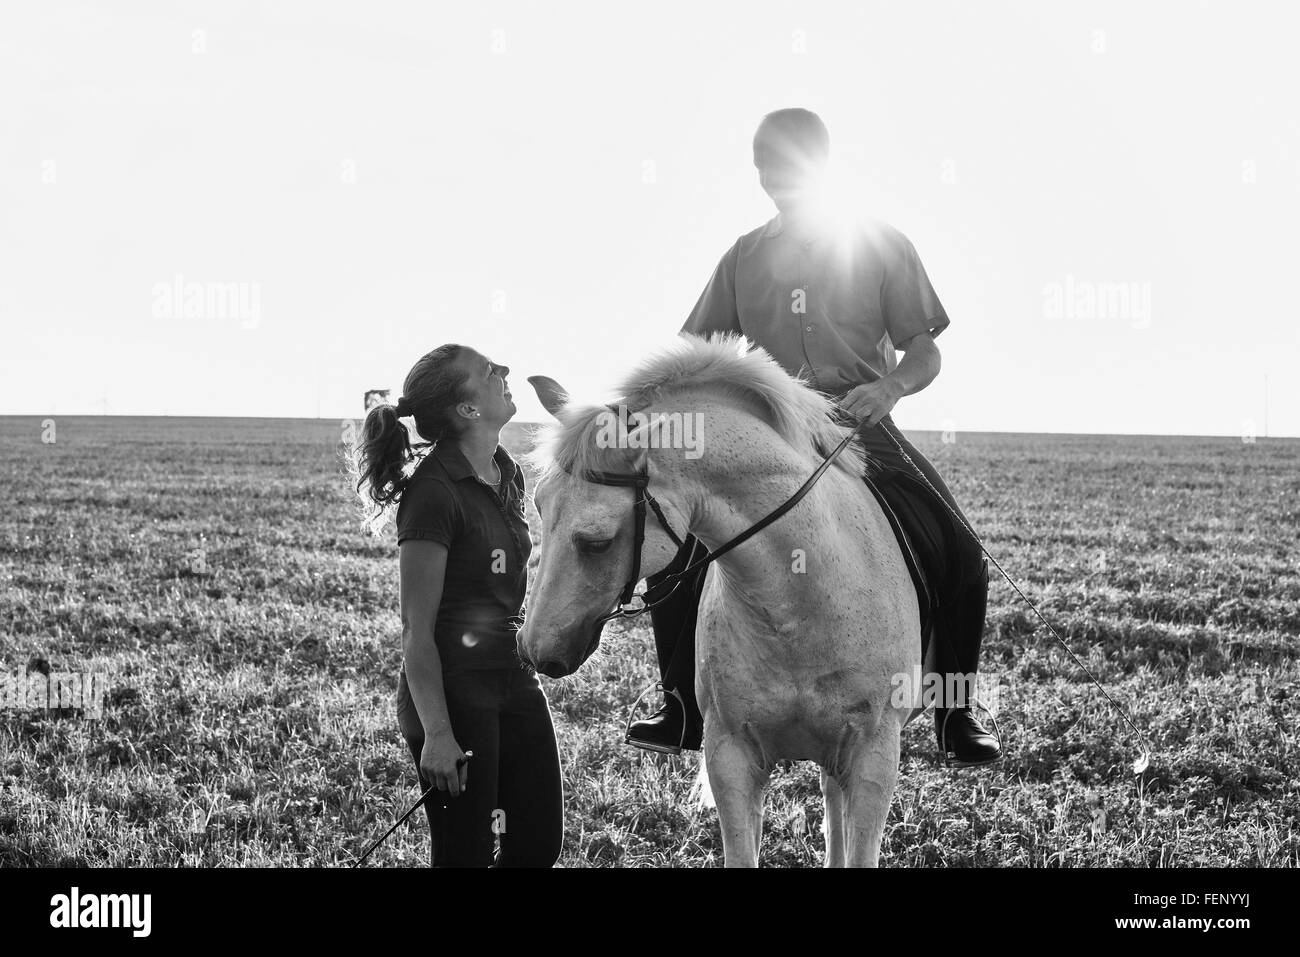 B&W image of woman chatting with man riding grey horse in field Stock Photo